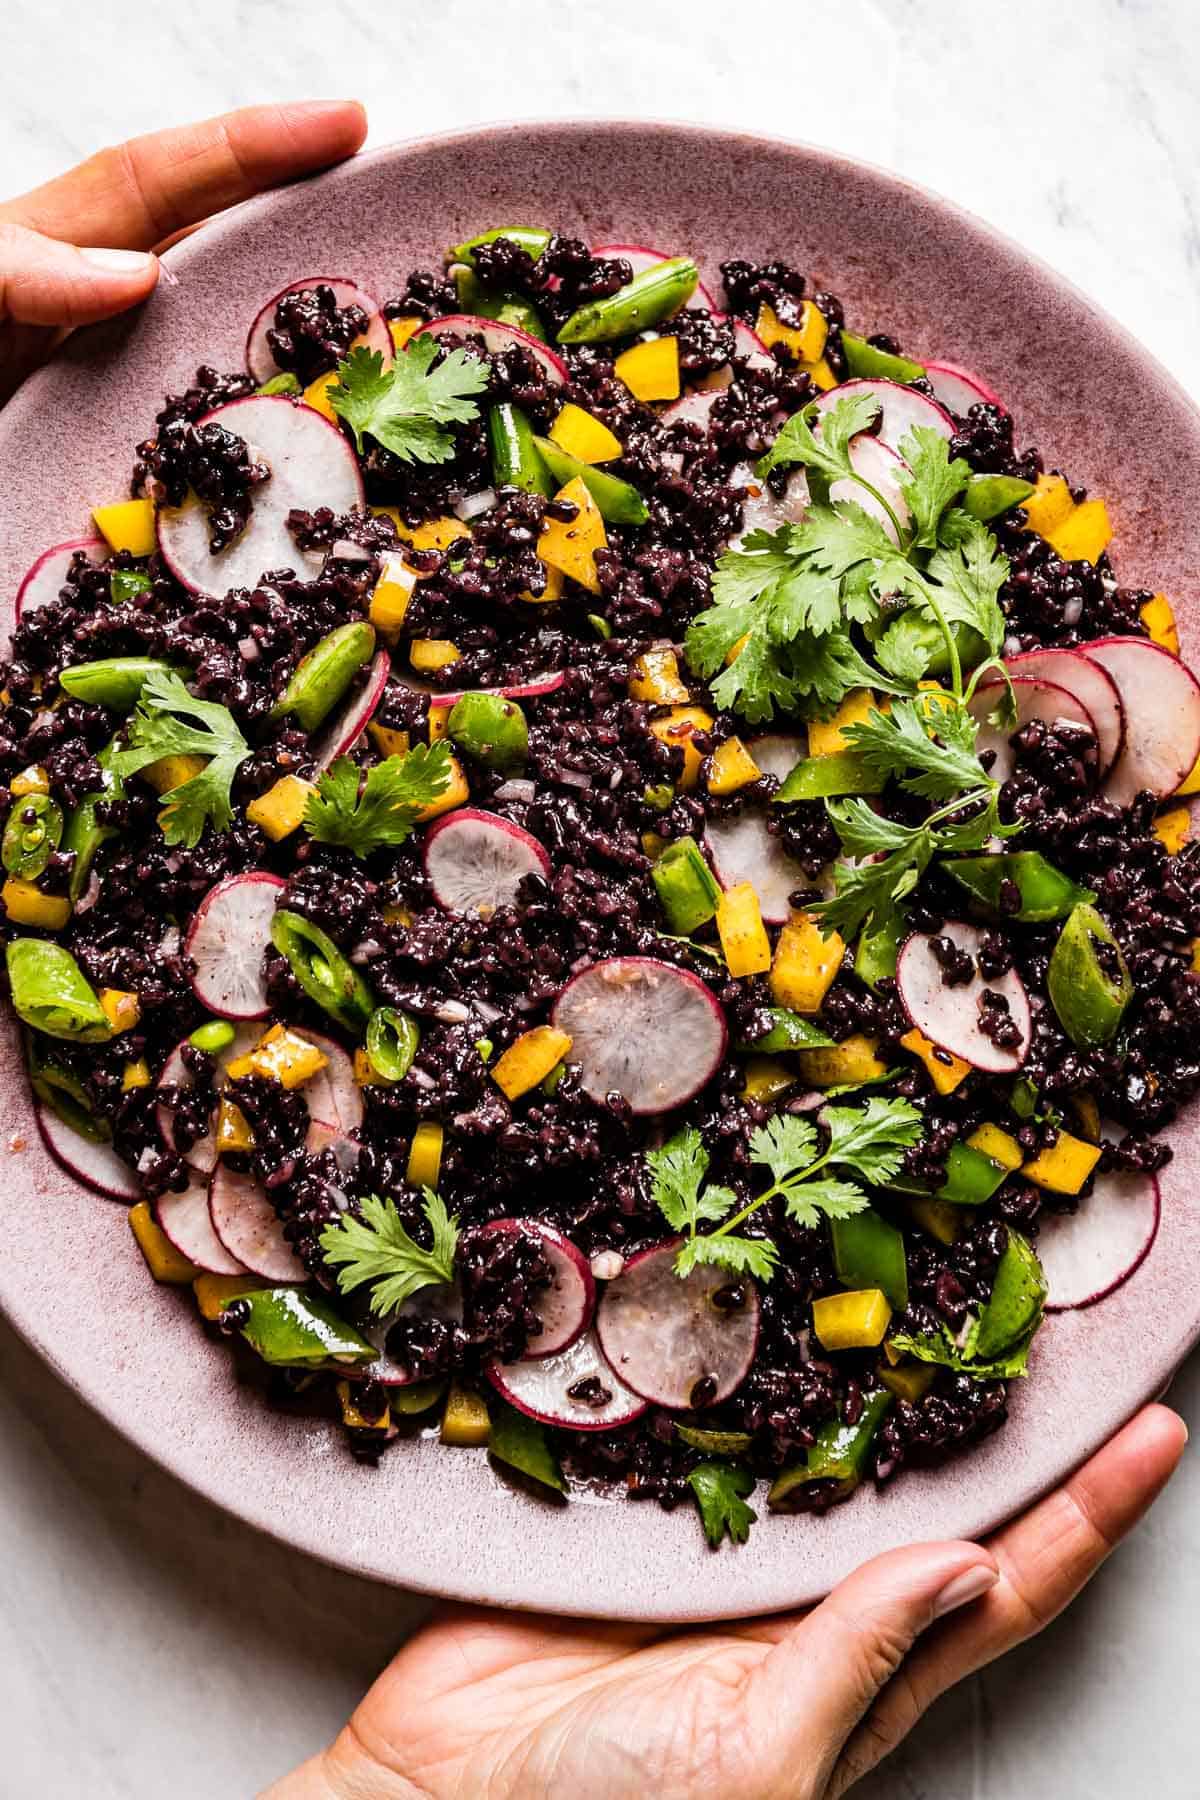 Black rice salad served on a pink plate by a person from top view